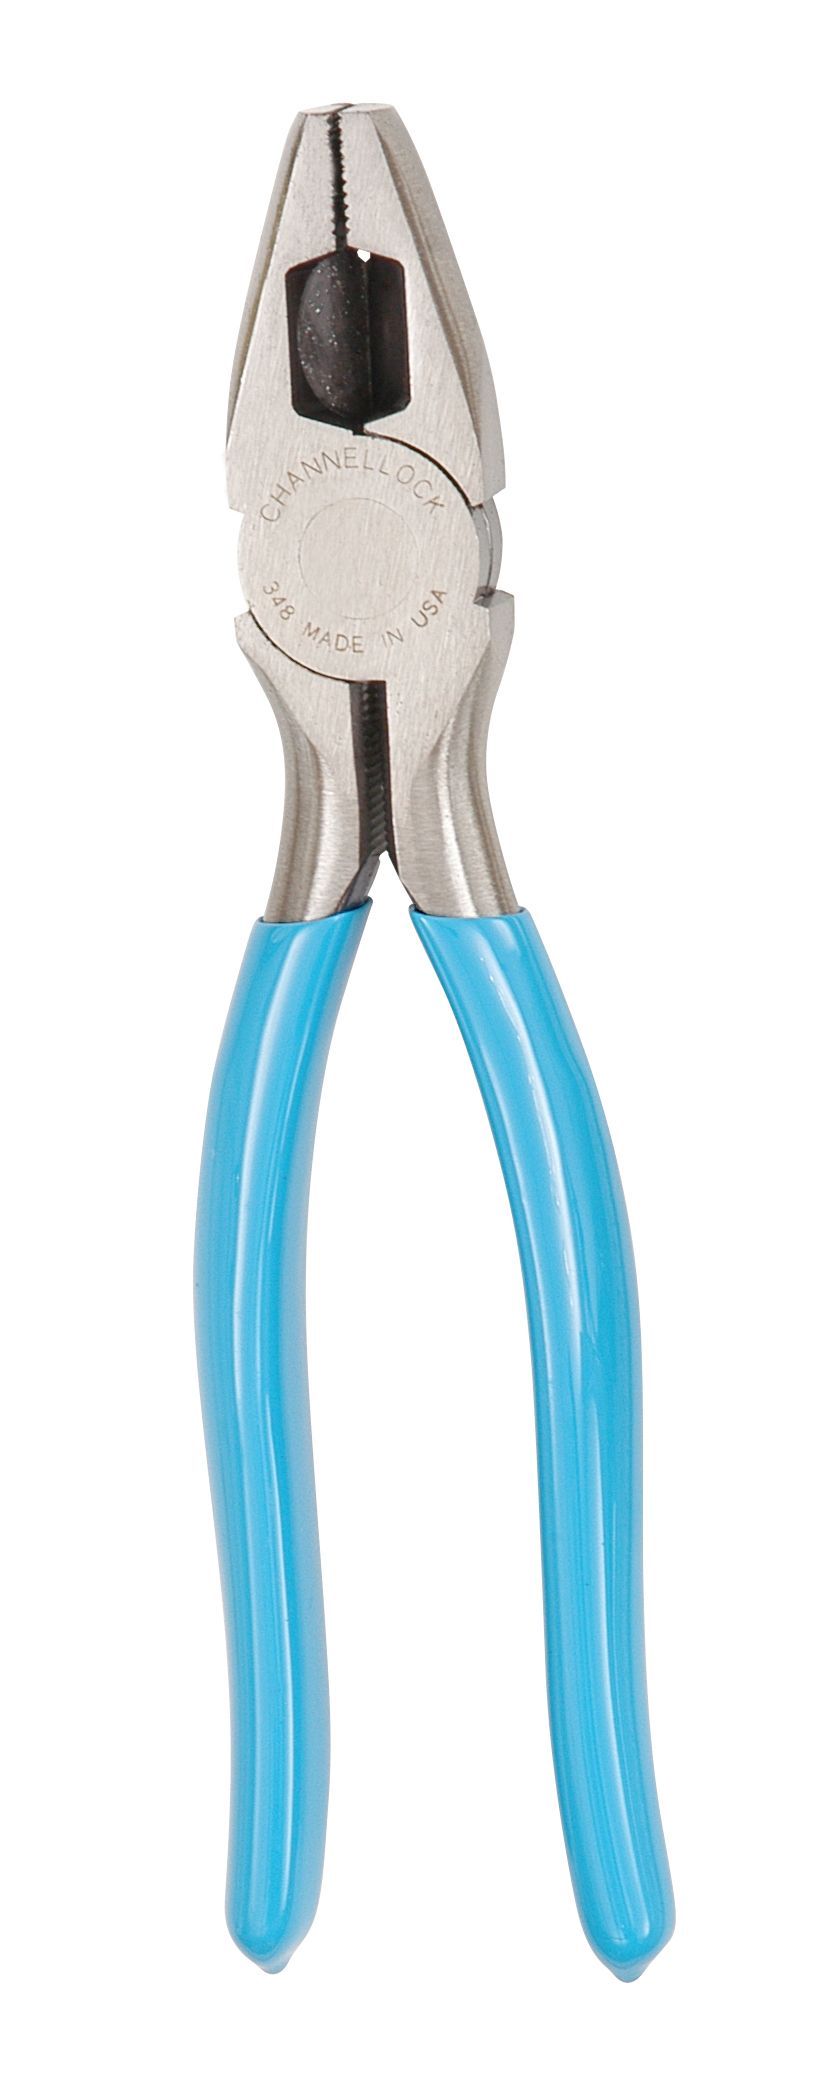 Channellock 8.5 in. Linemen's Plier with Cutter